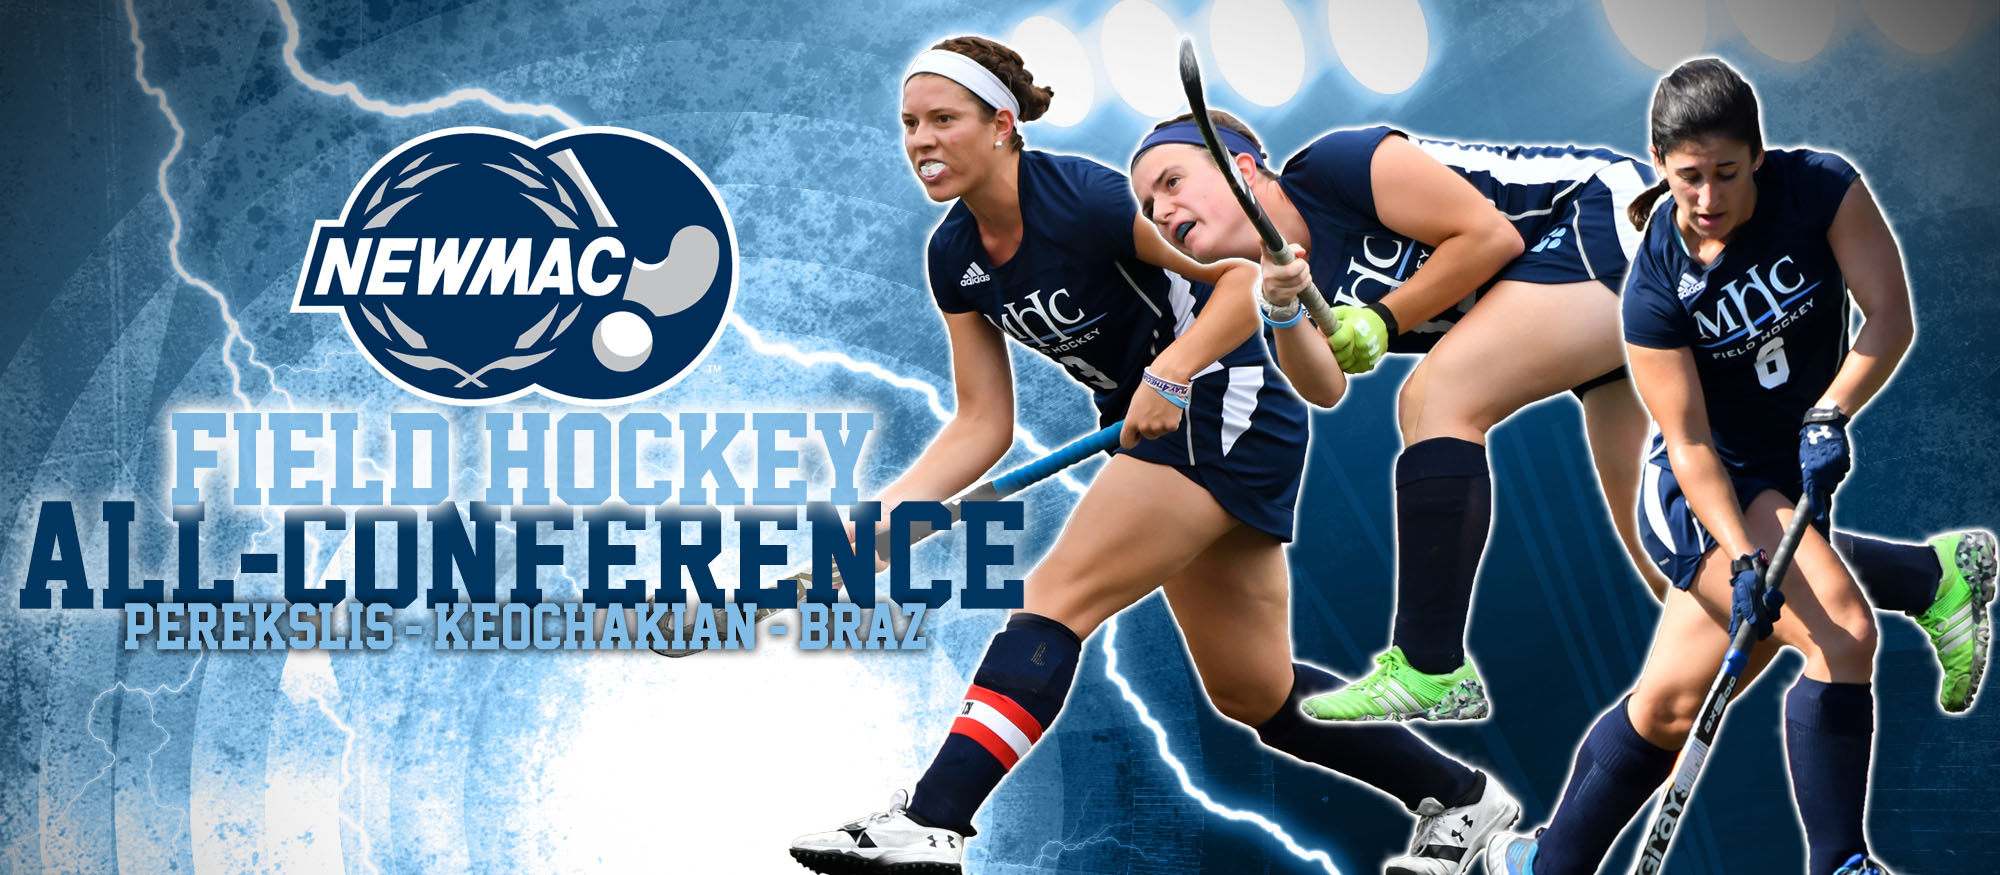 Graphic showing the 2017 NEWMAC All-Conference selections in field hockey. Sophie Perekslis, Mirjam Keochakian and Kaitlin Braz.